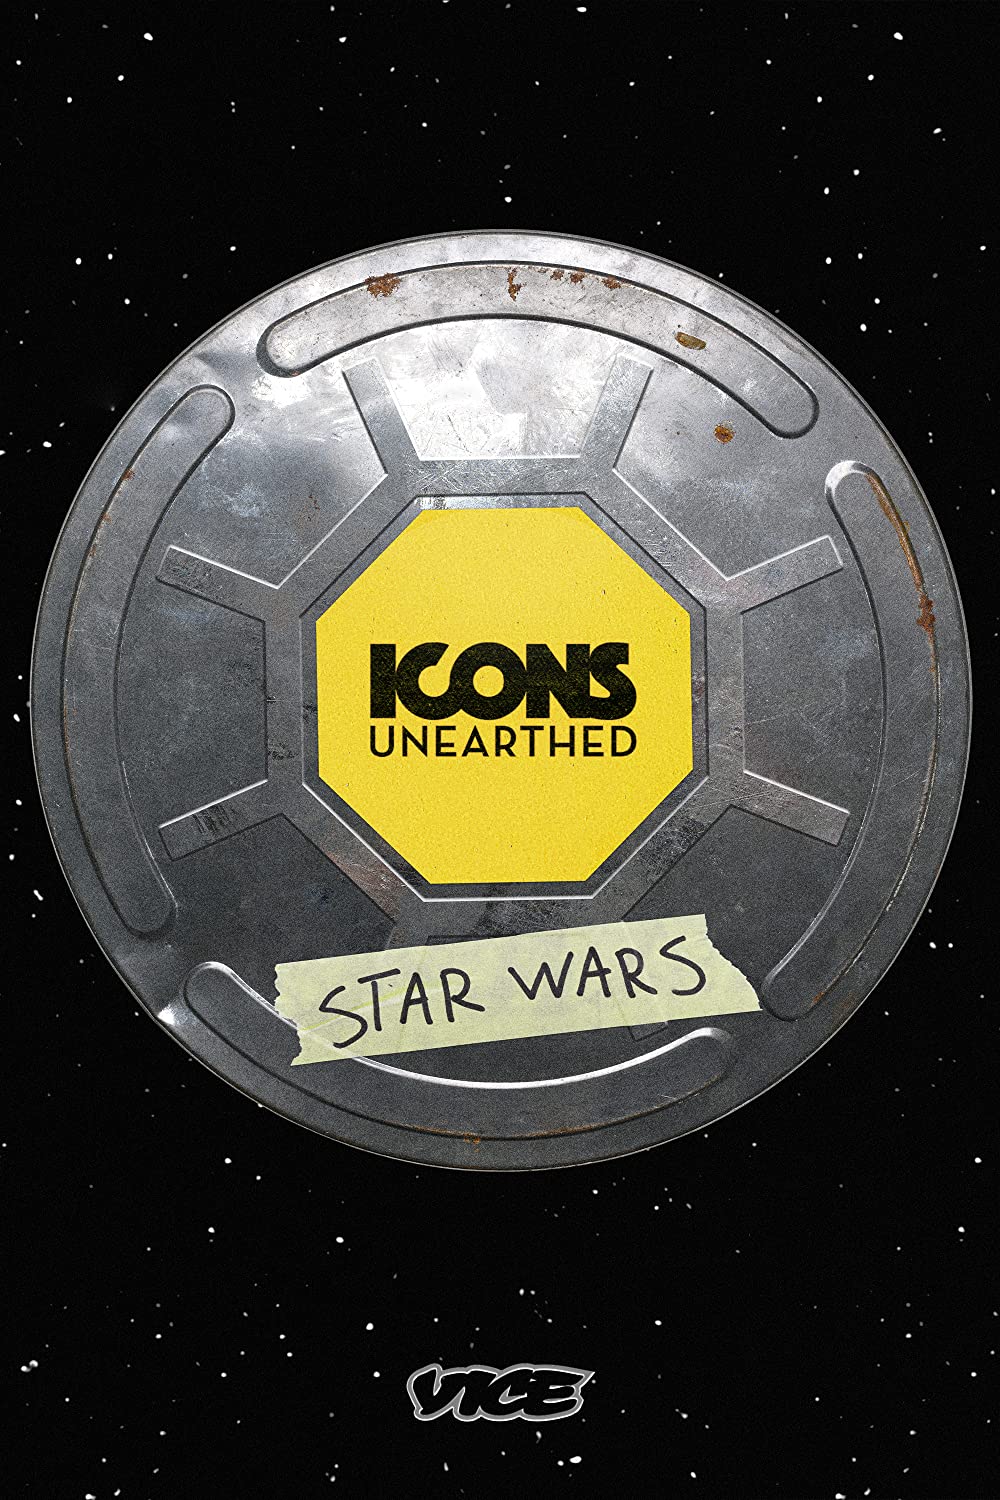 Icons Unearthed: Star Wars - Season 1